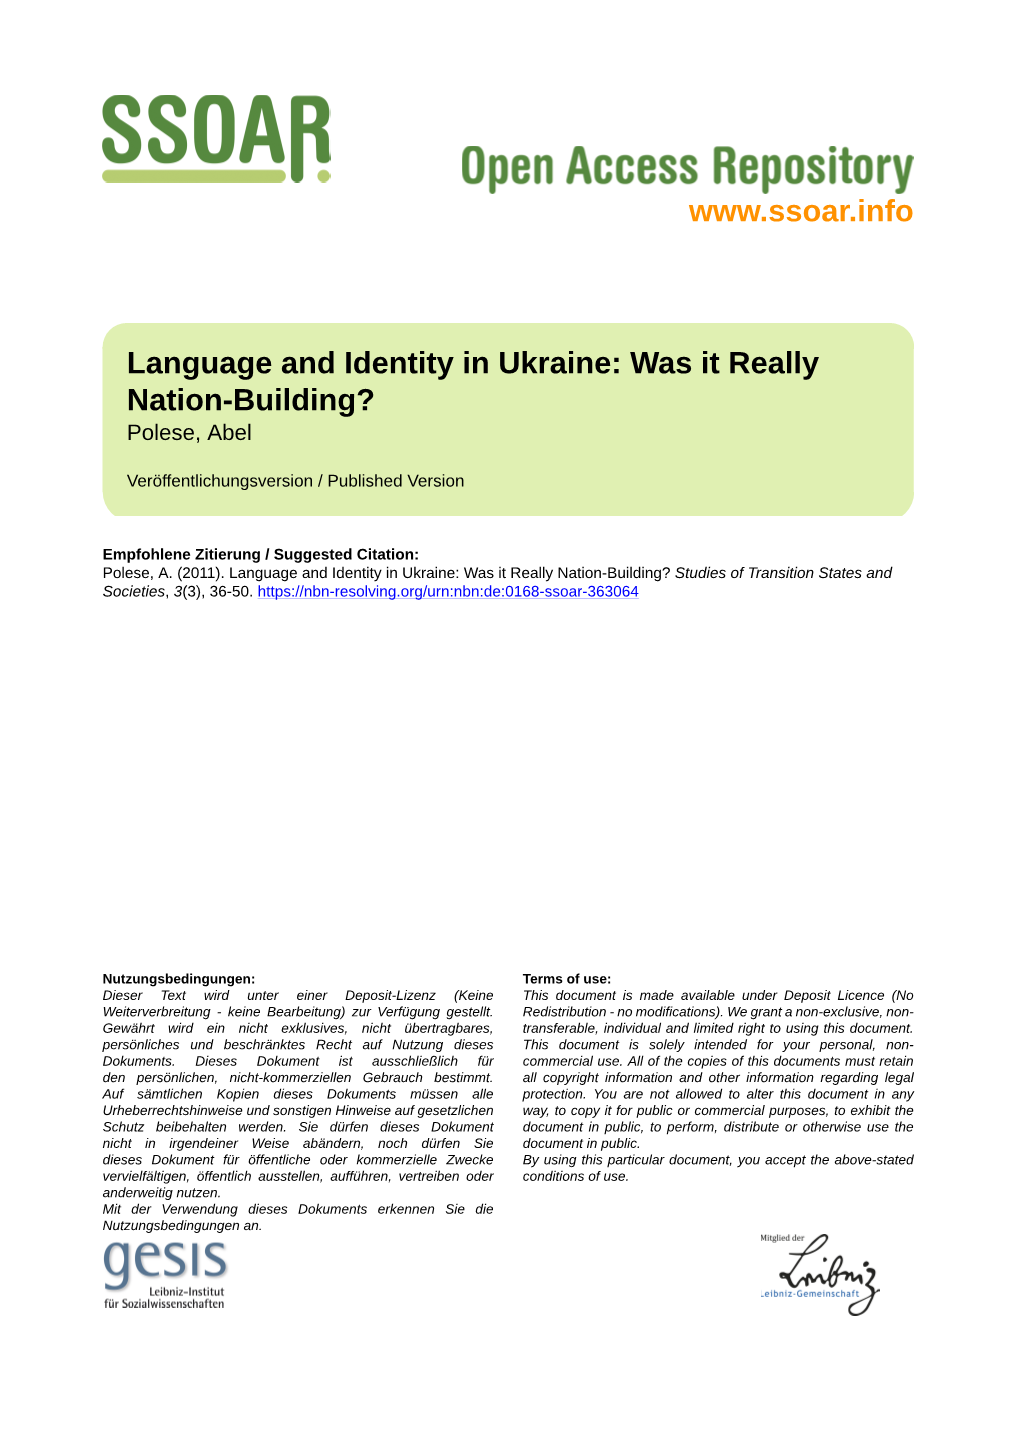 Language and Identity in Ukraine: Was It Really Nation-Building? Polese, Abel